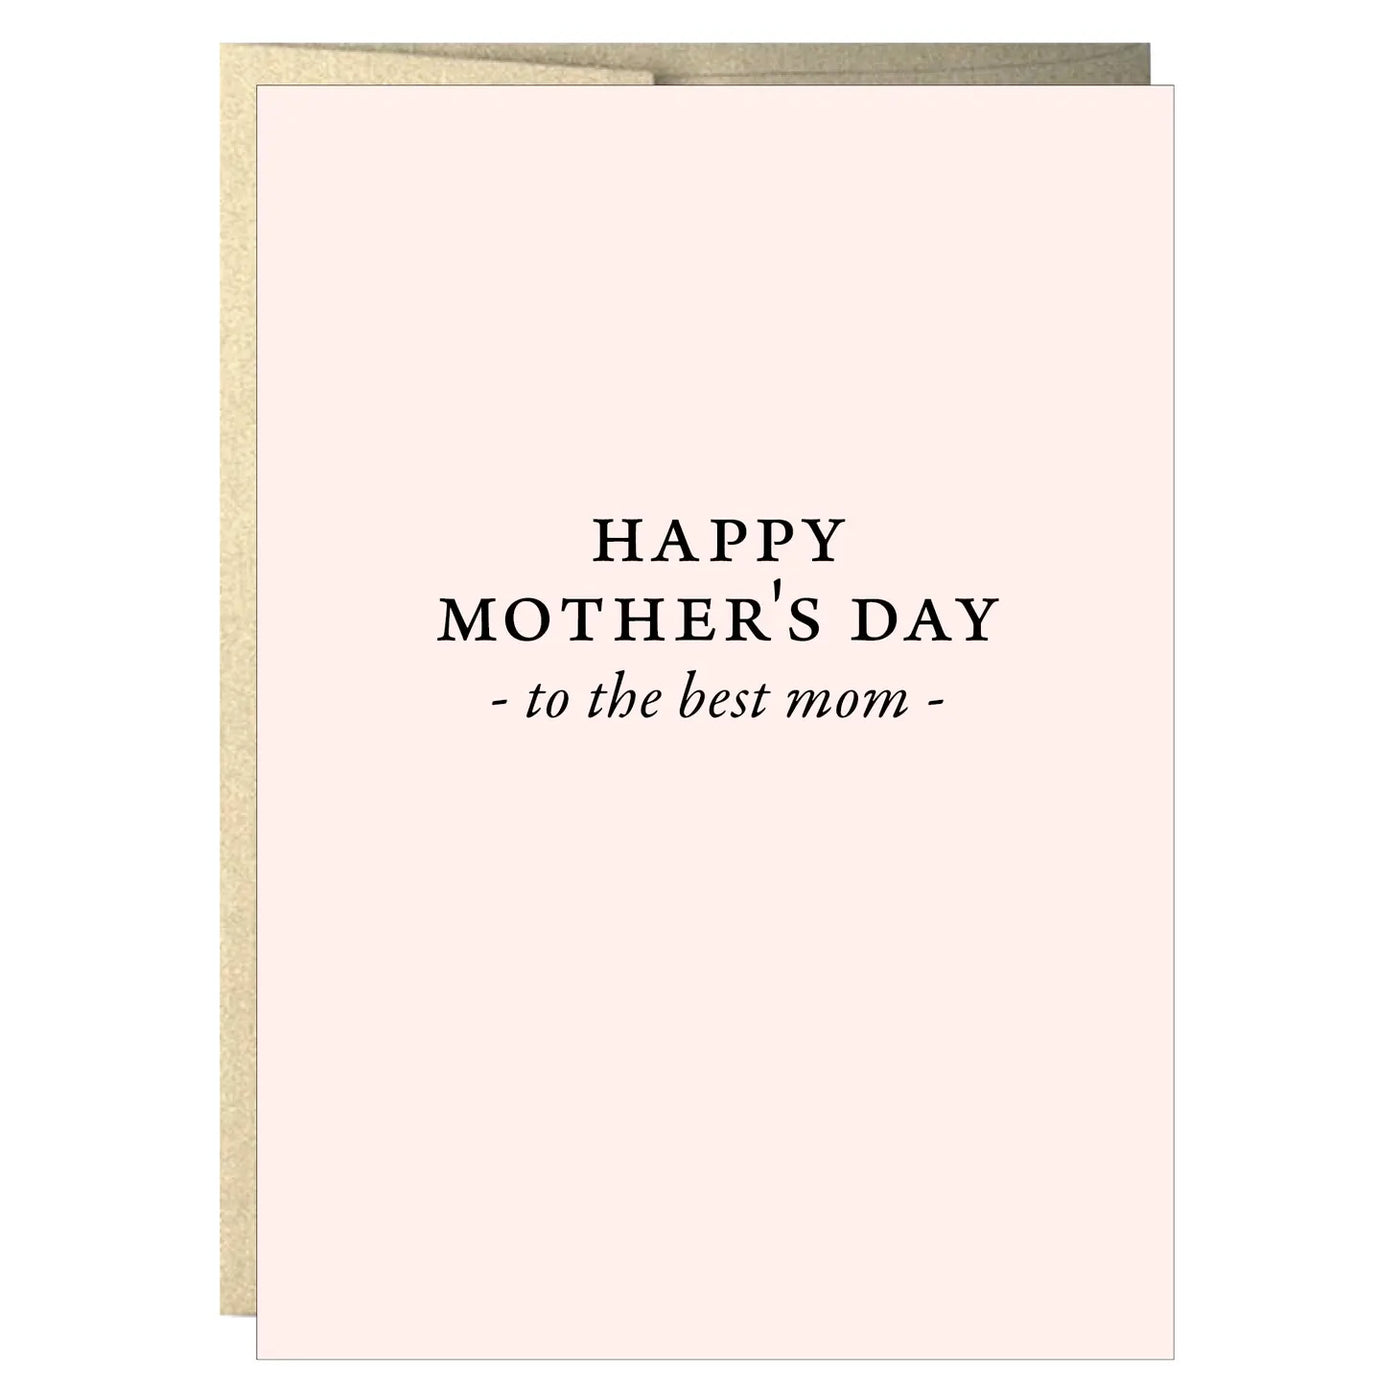 Happy Mother's Day To the Best Mom Greeting Card